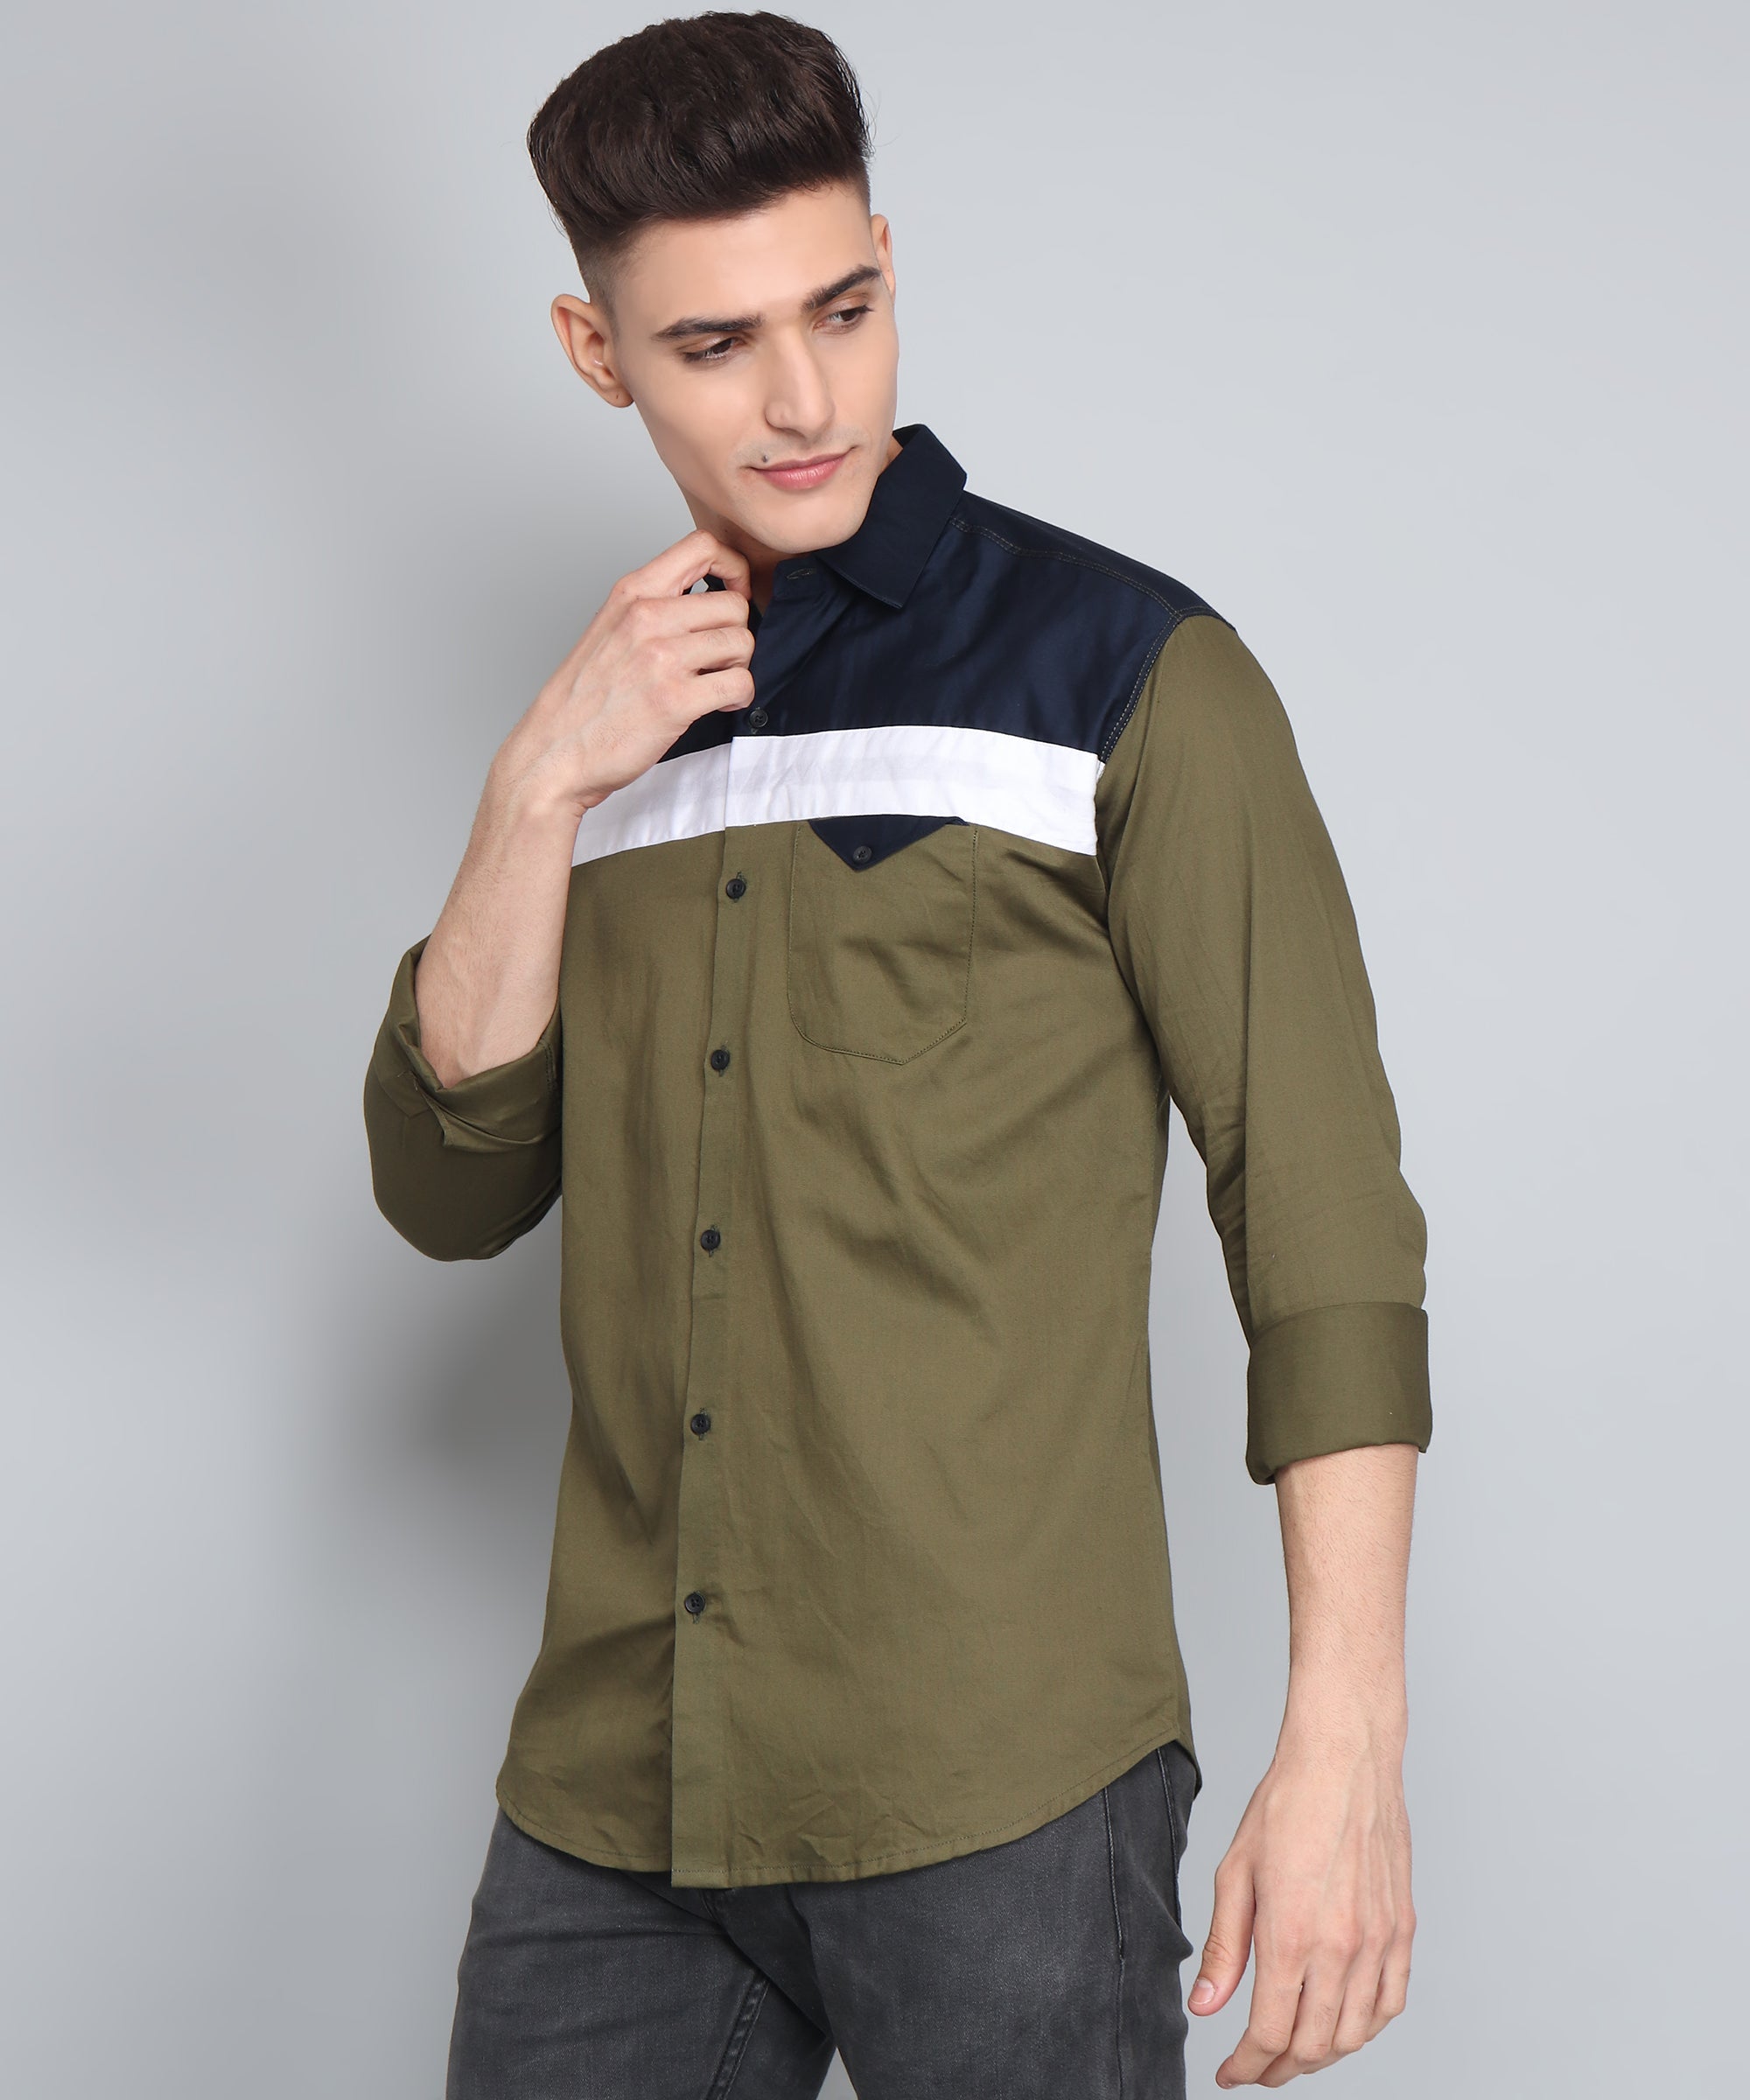 Casual Cool: Elevate Your Wardrobe with the Trendiest Men's Stylish Casual Shirts